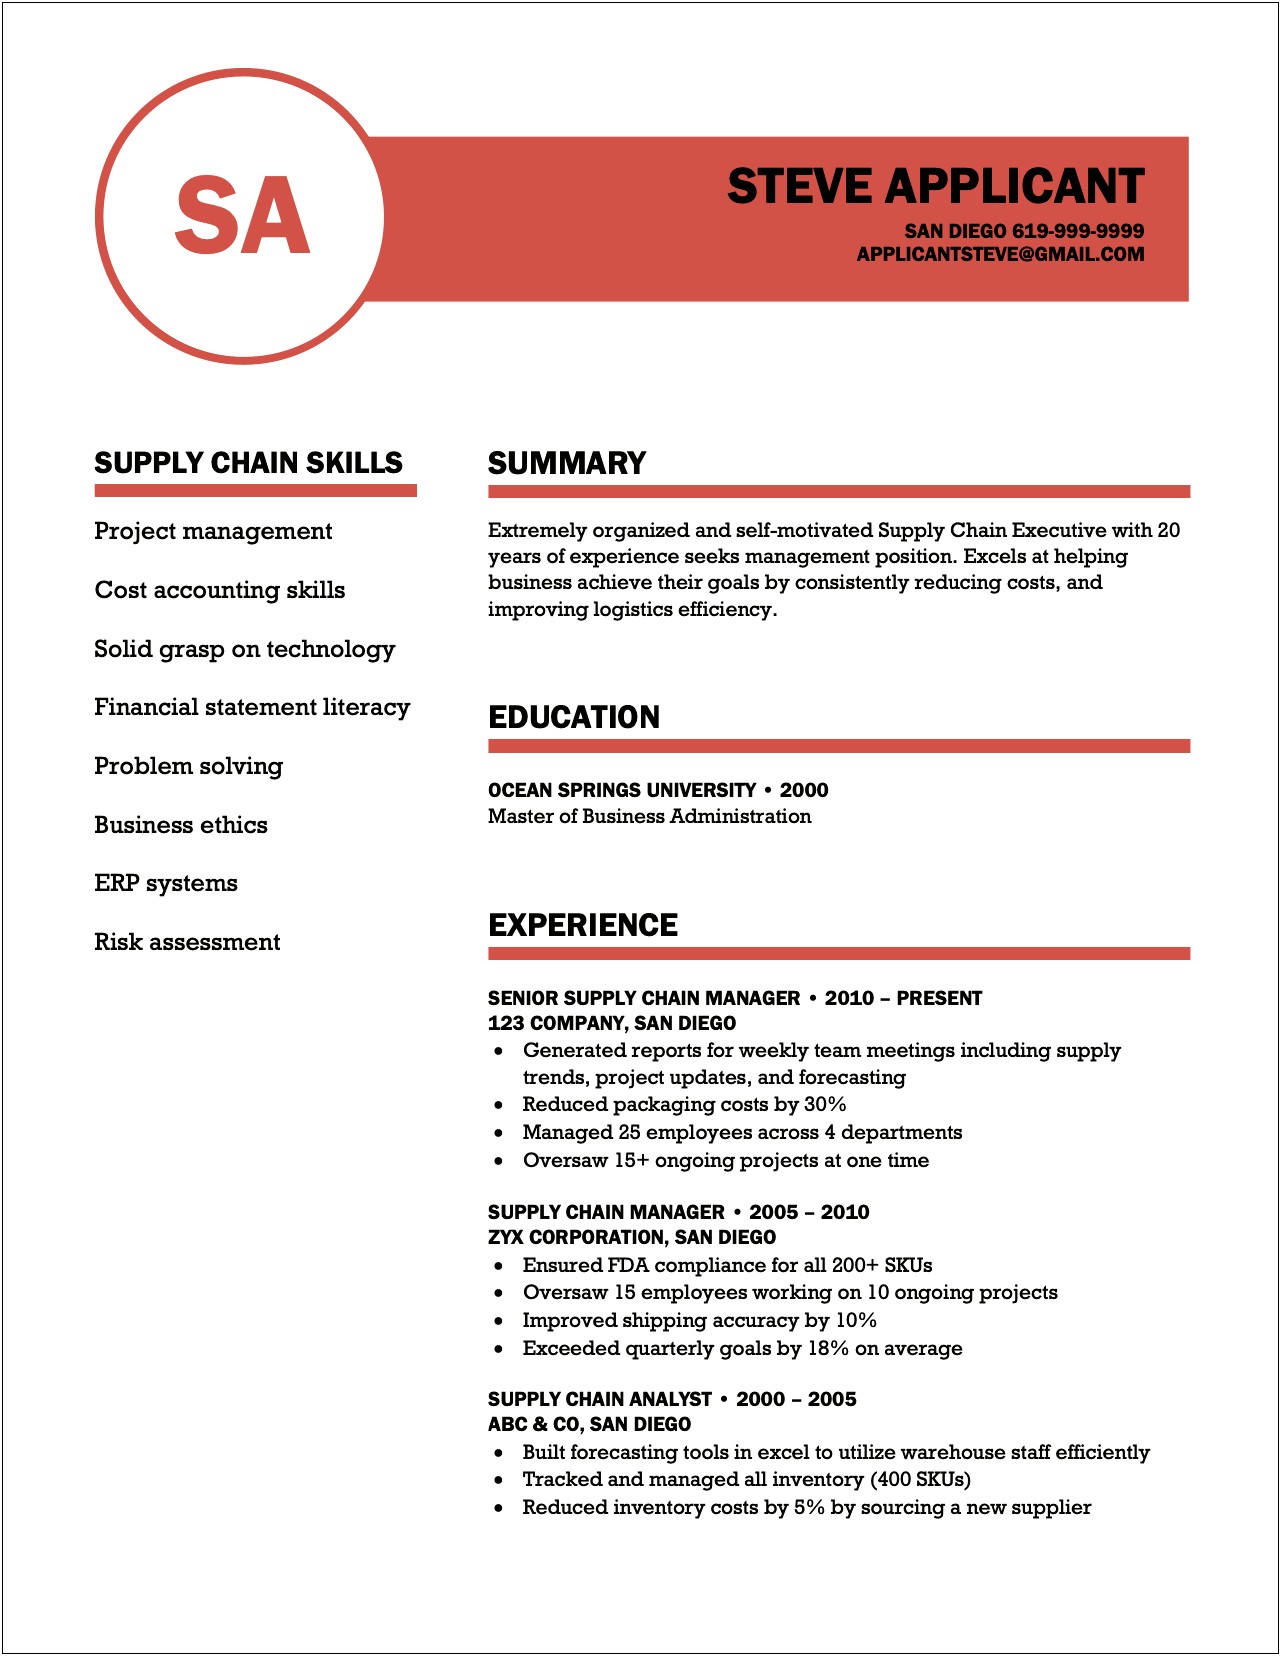 Supply Chain Manager Resume Pdf